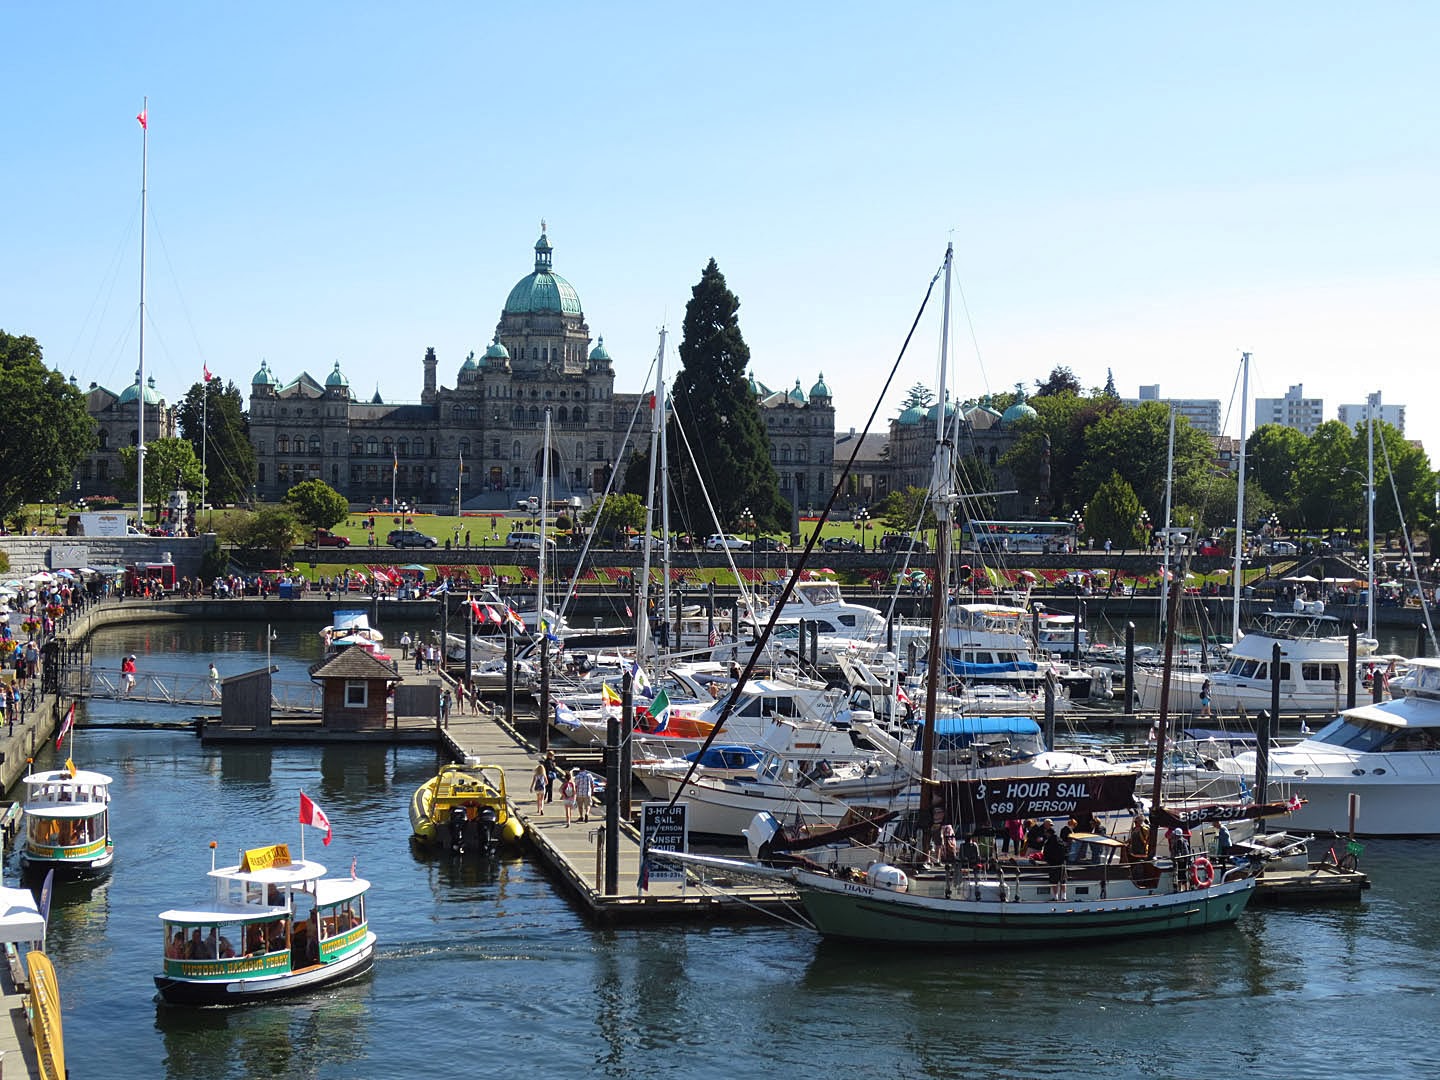 Boats are moored in the inner harbor, downtown Victoria, BC